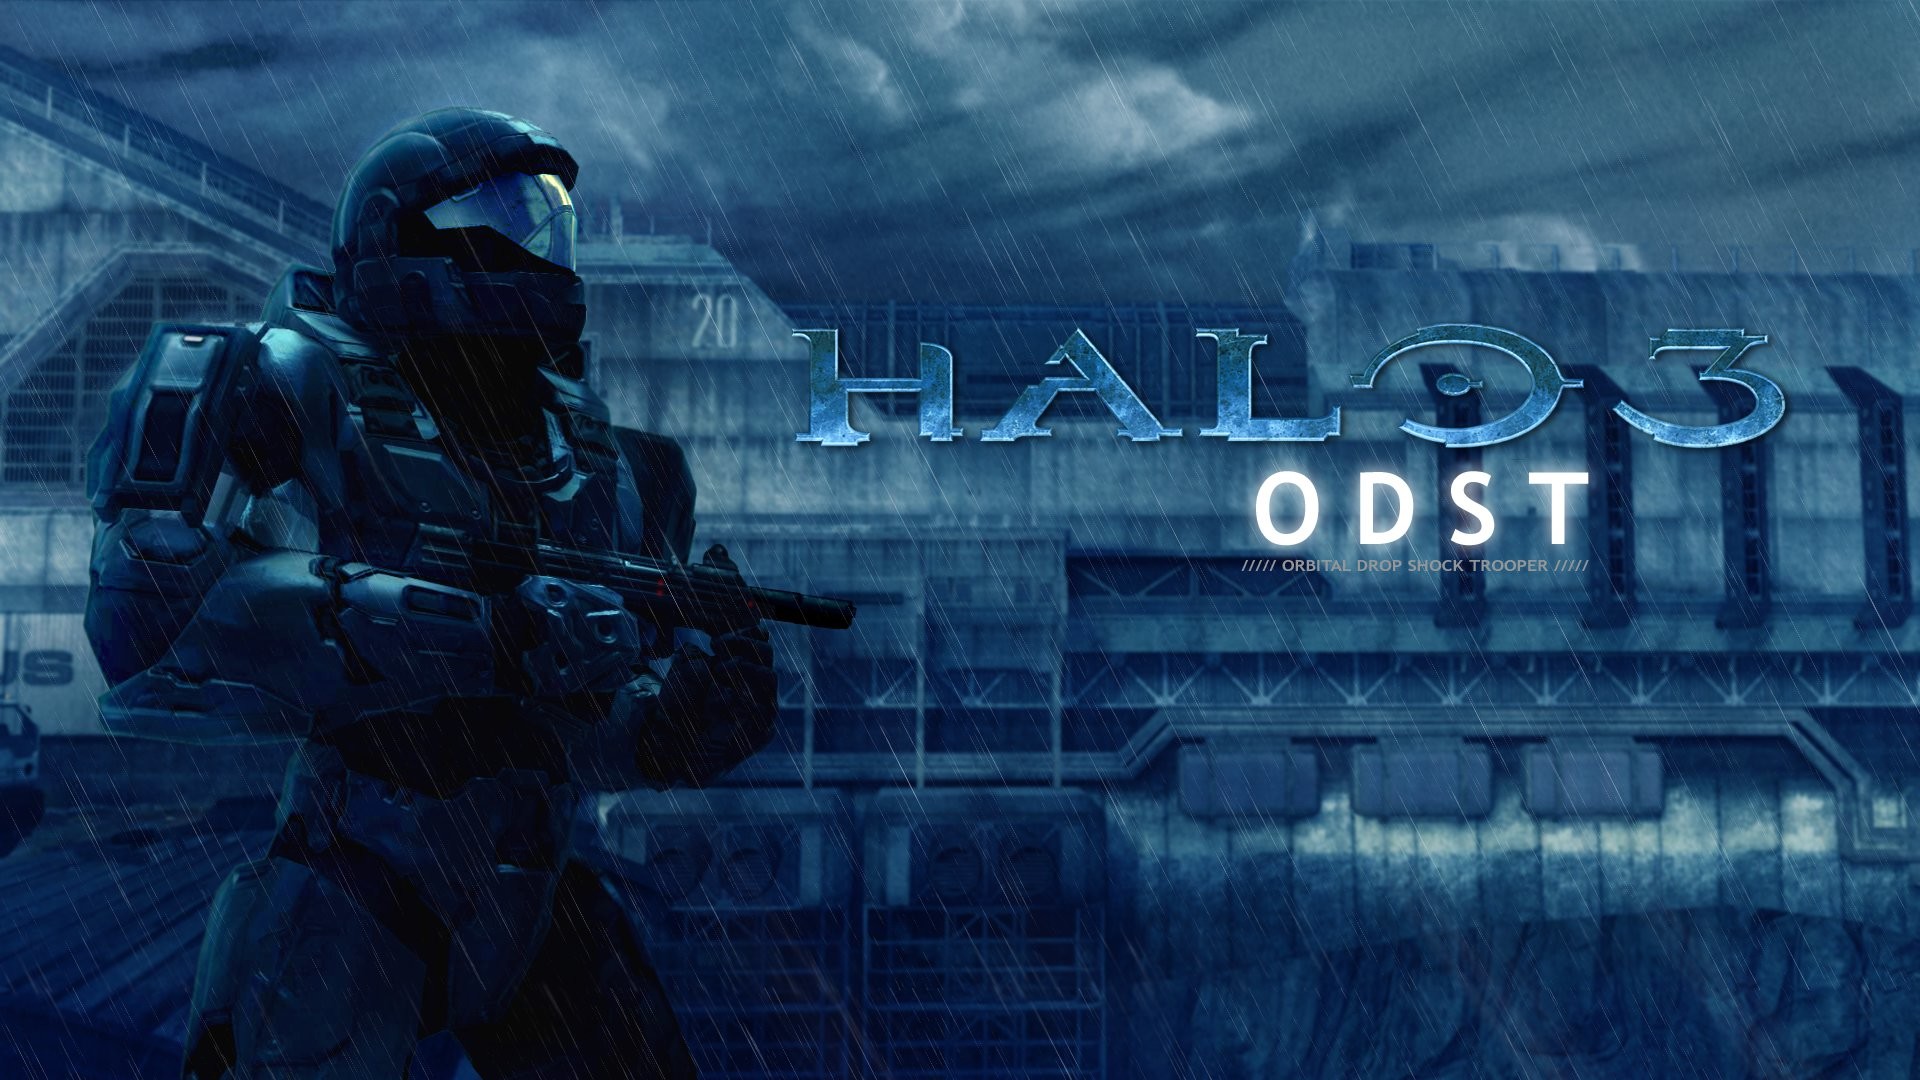 Halo 3 Odst Wallpapers.